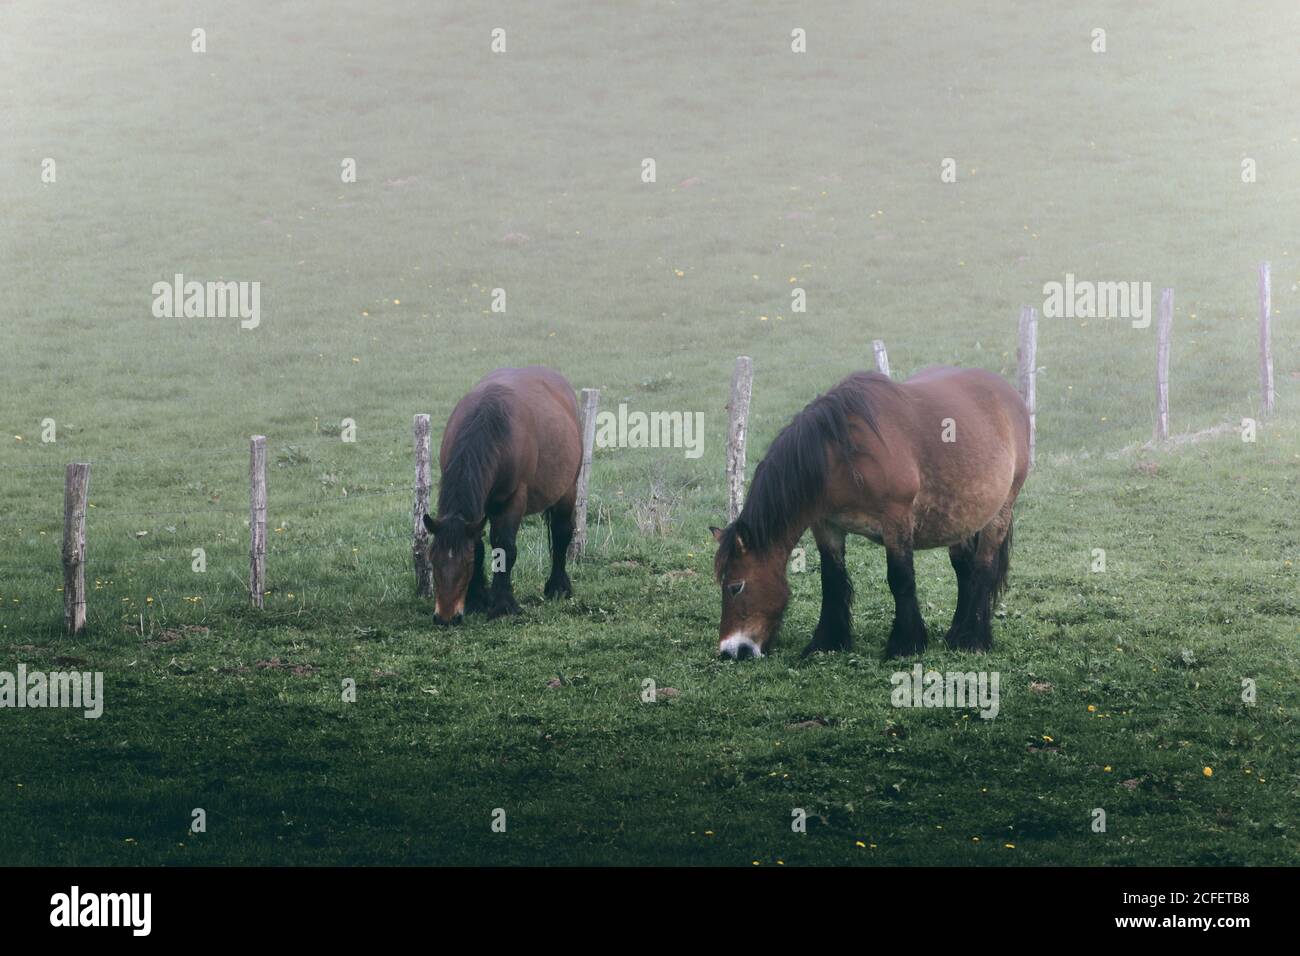 Amazing horses with chestnut colored coat standing on foggy background of nature Stock Photo